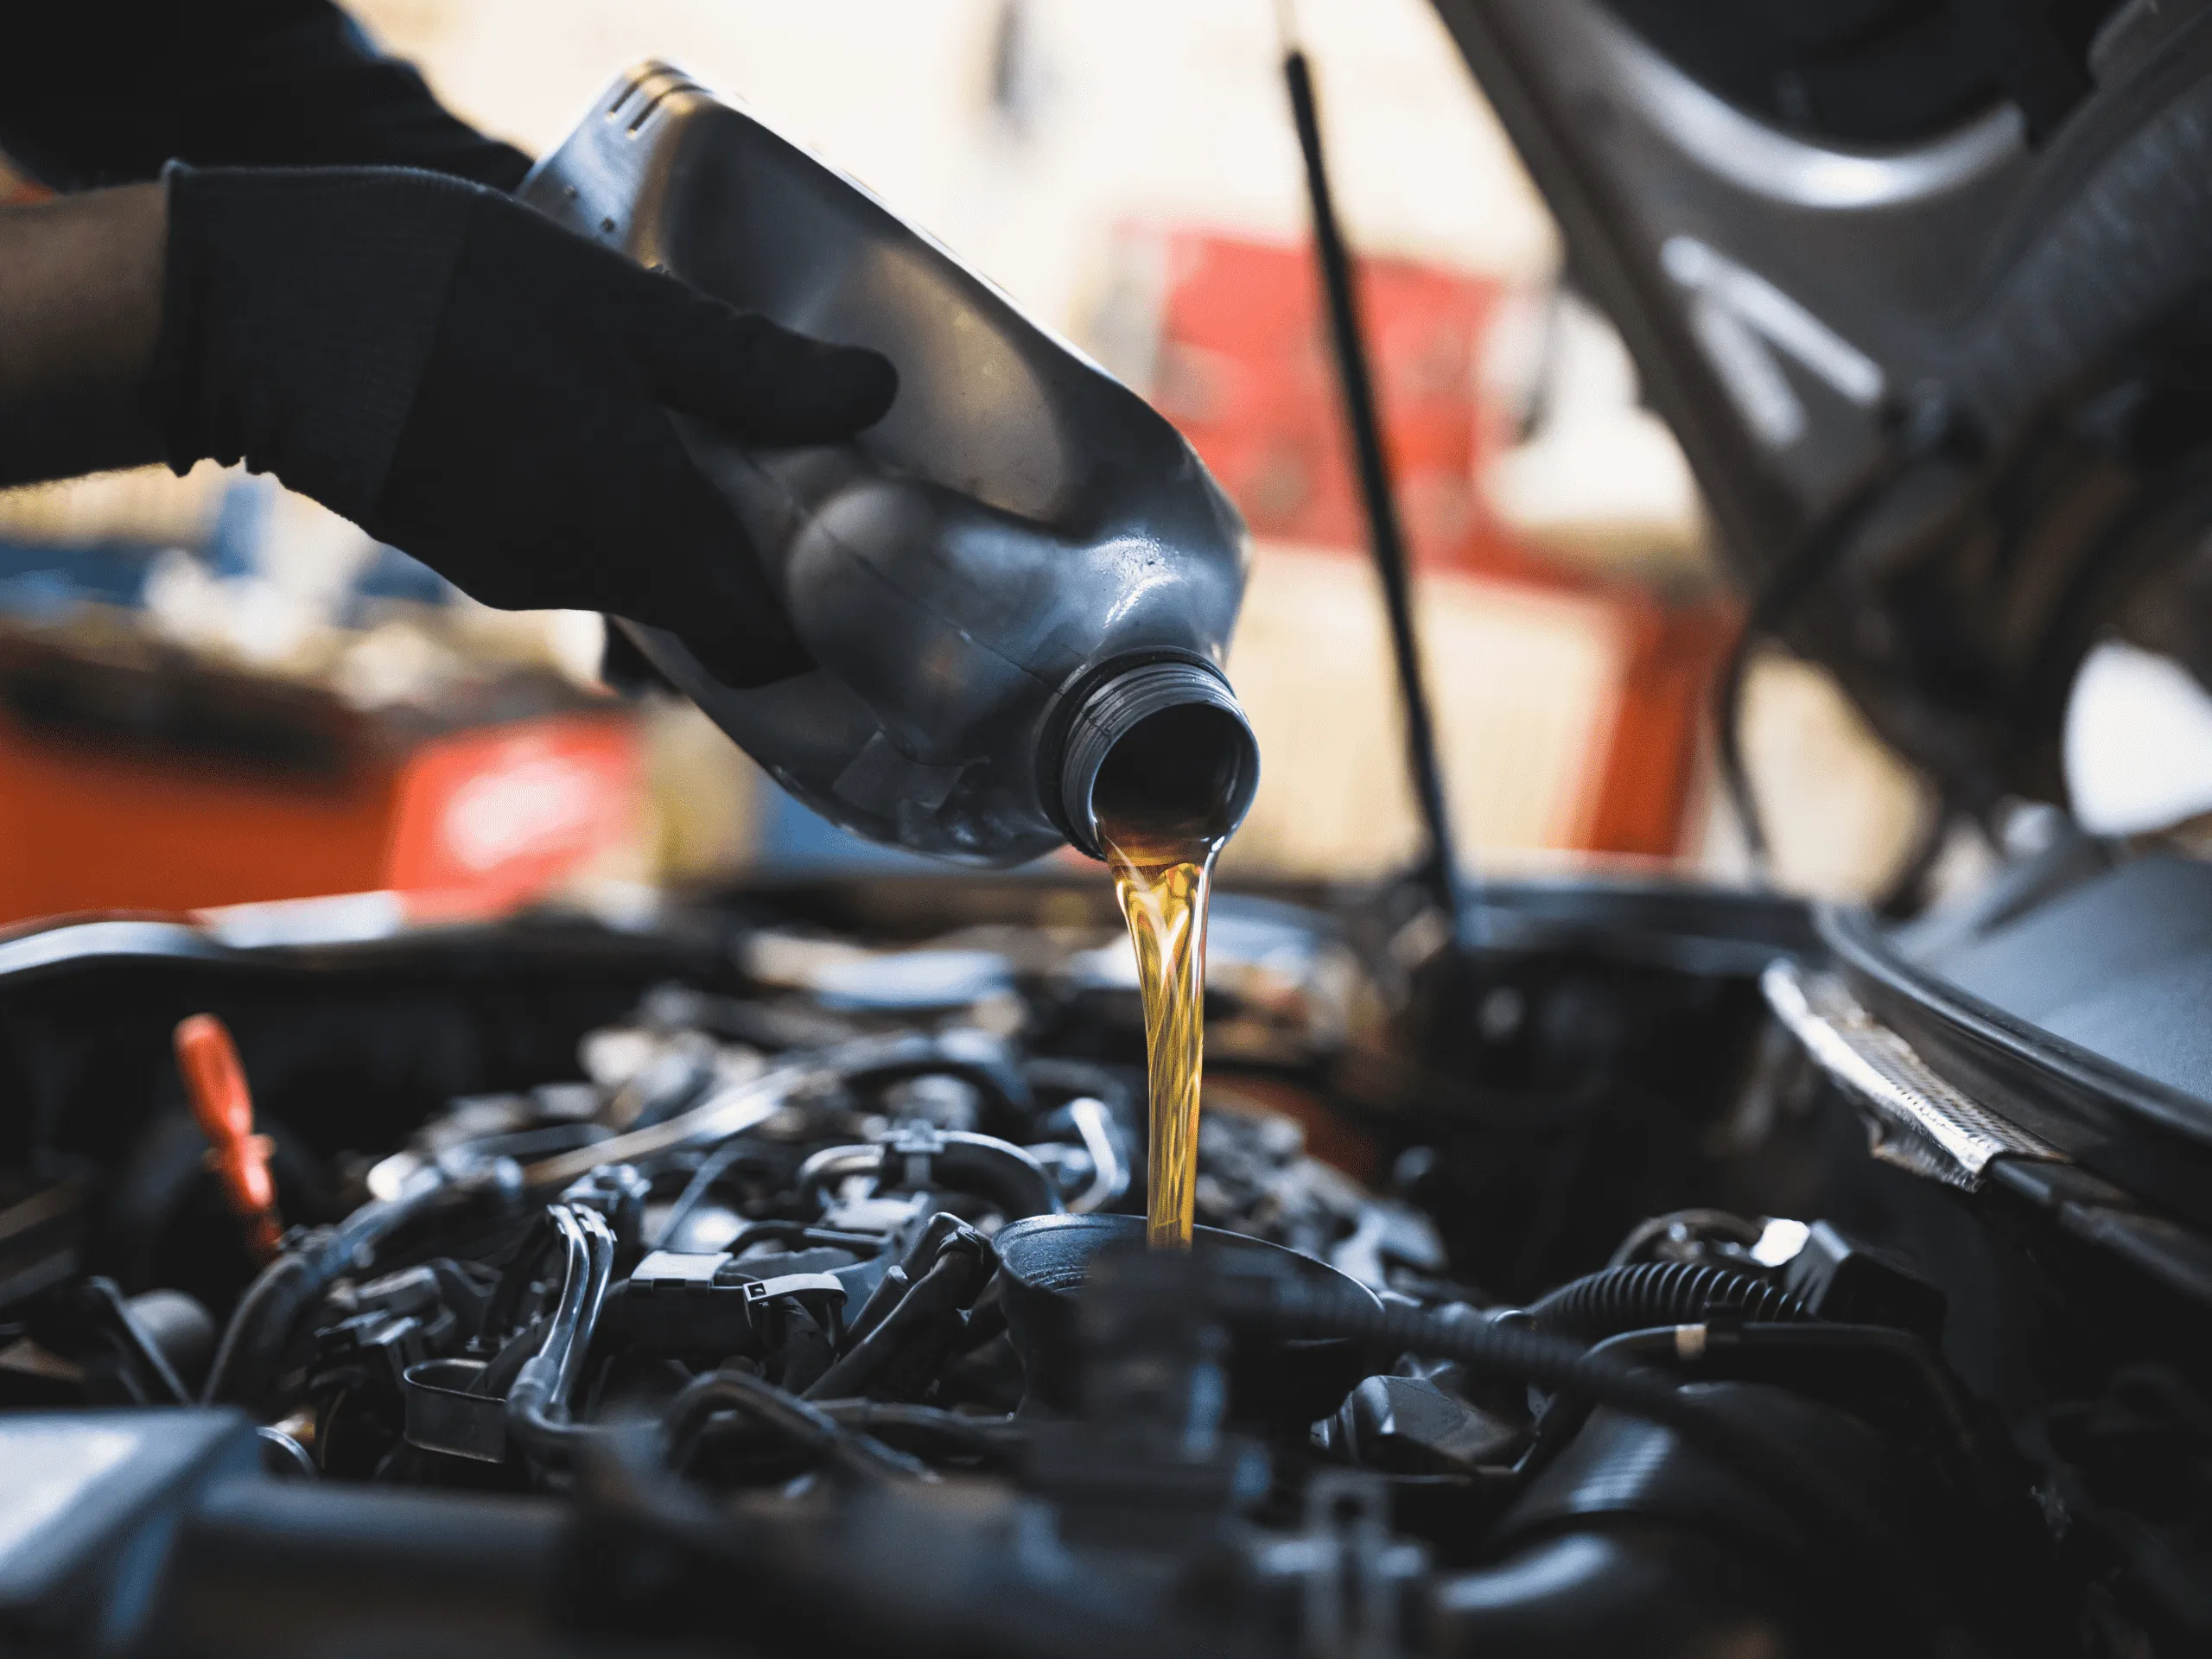 Car engine oil being poured into engine